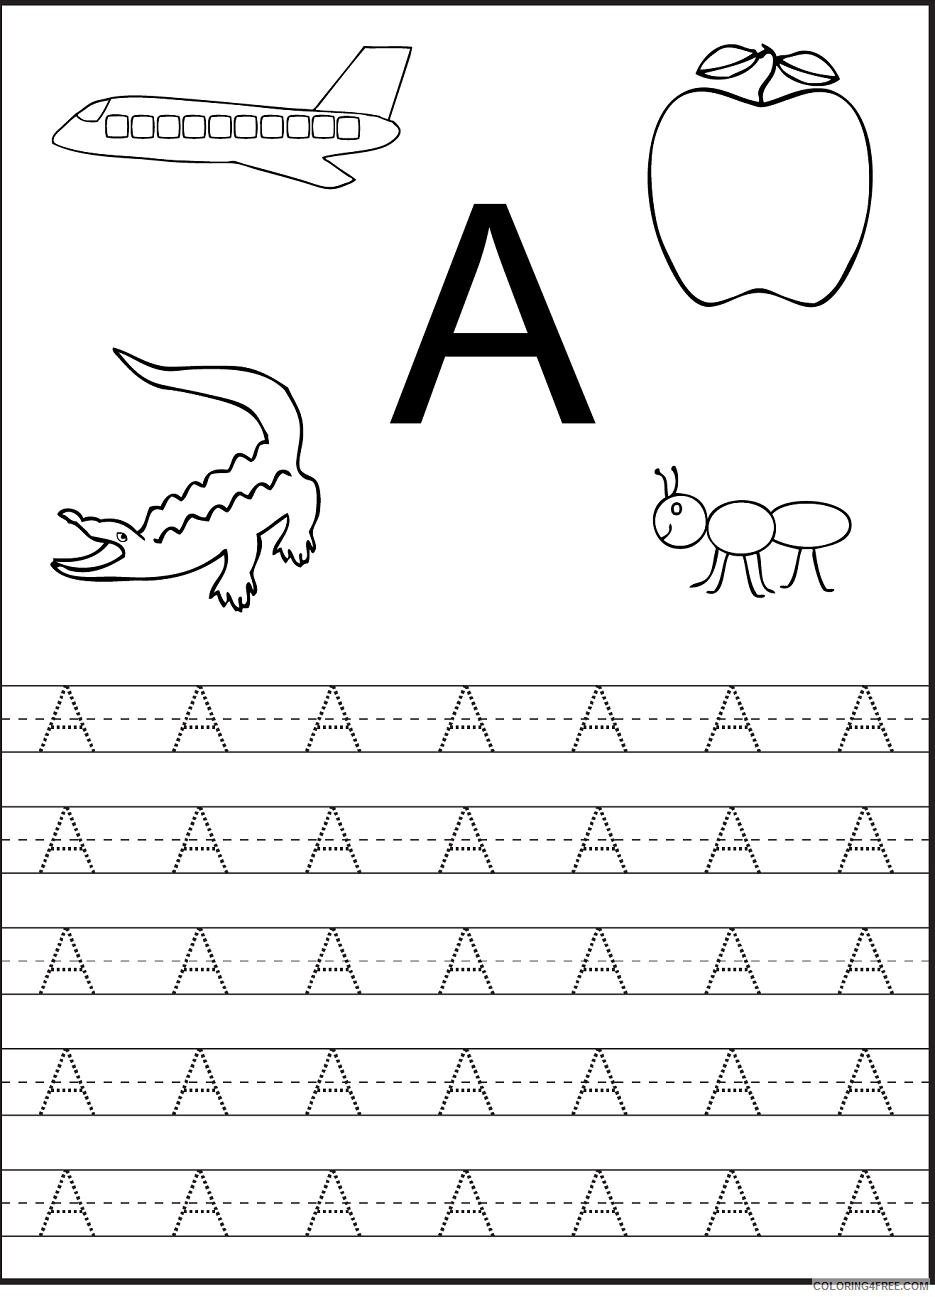 Preschool Worksheets Coloring Pages alphabet to educations 1 Printable 2021 4881 Coloring4free